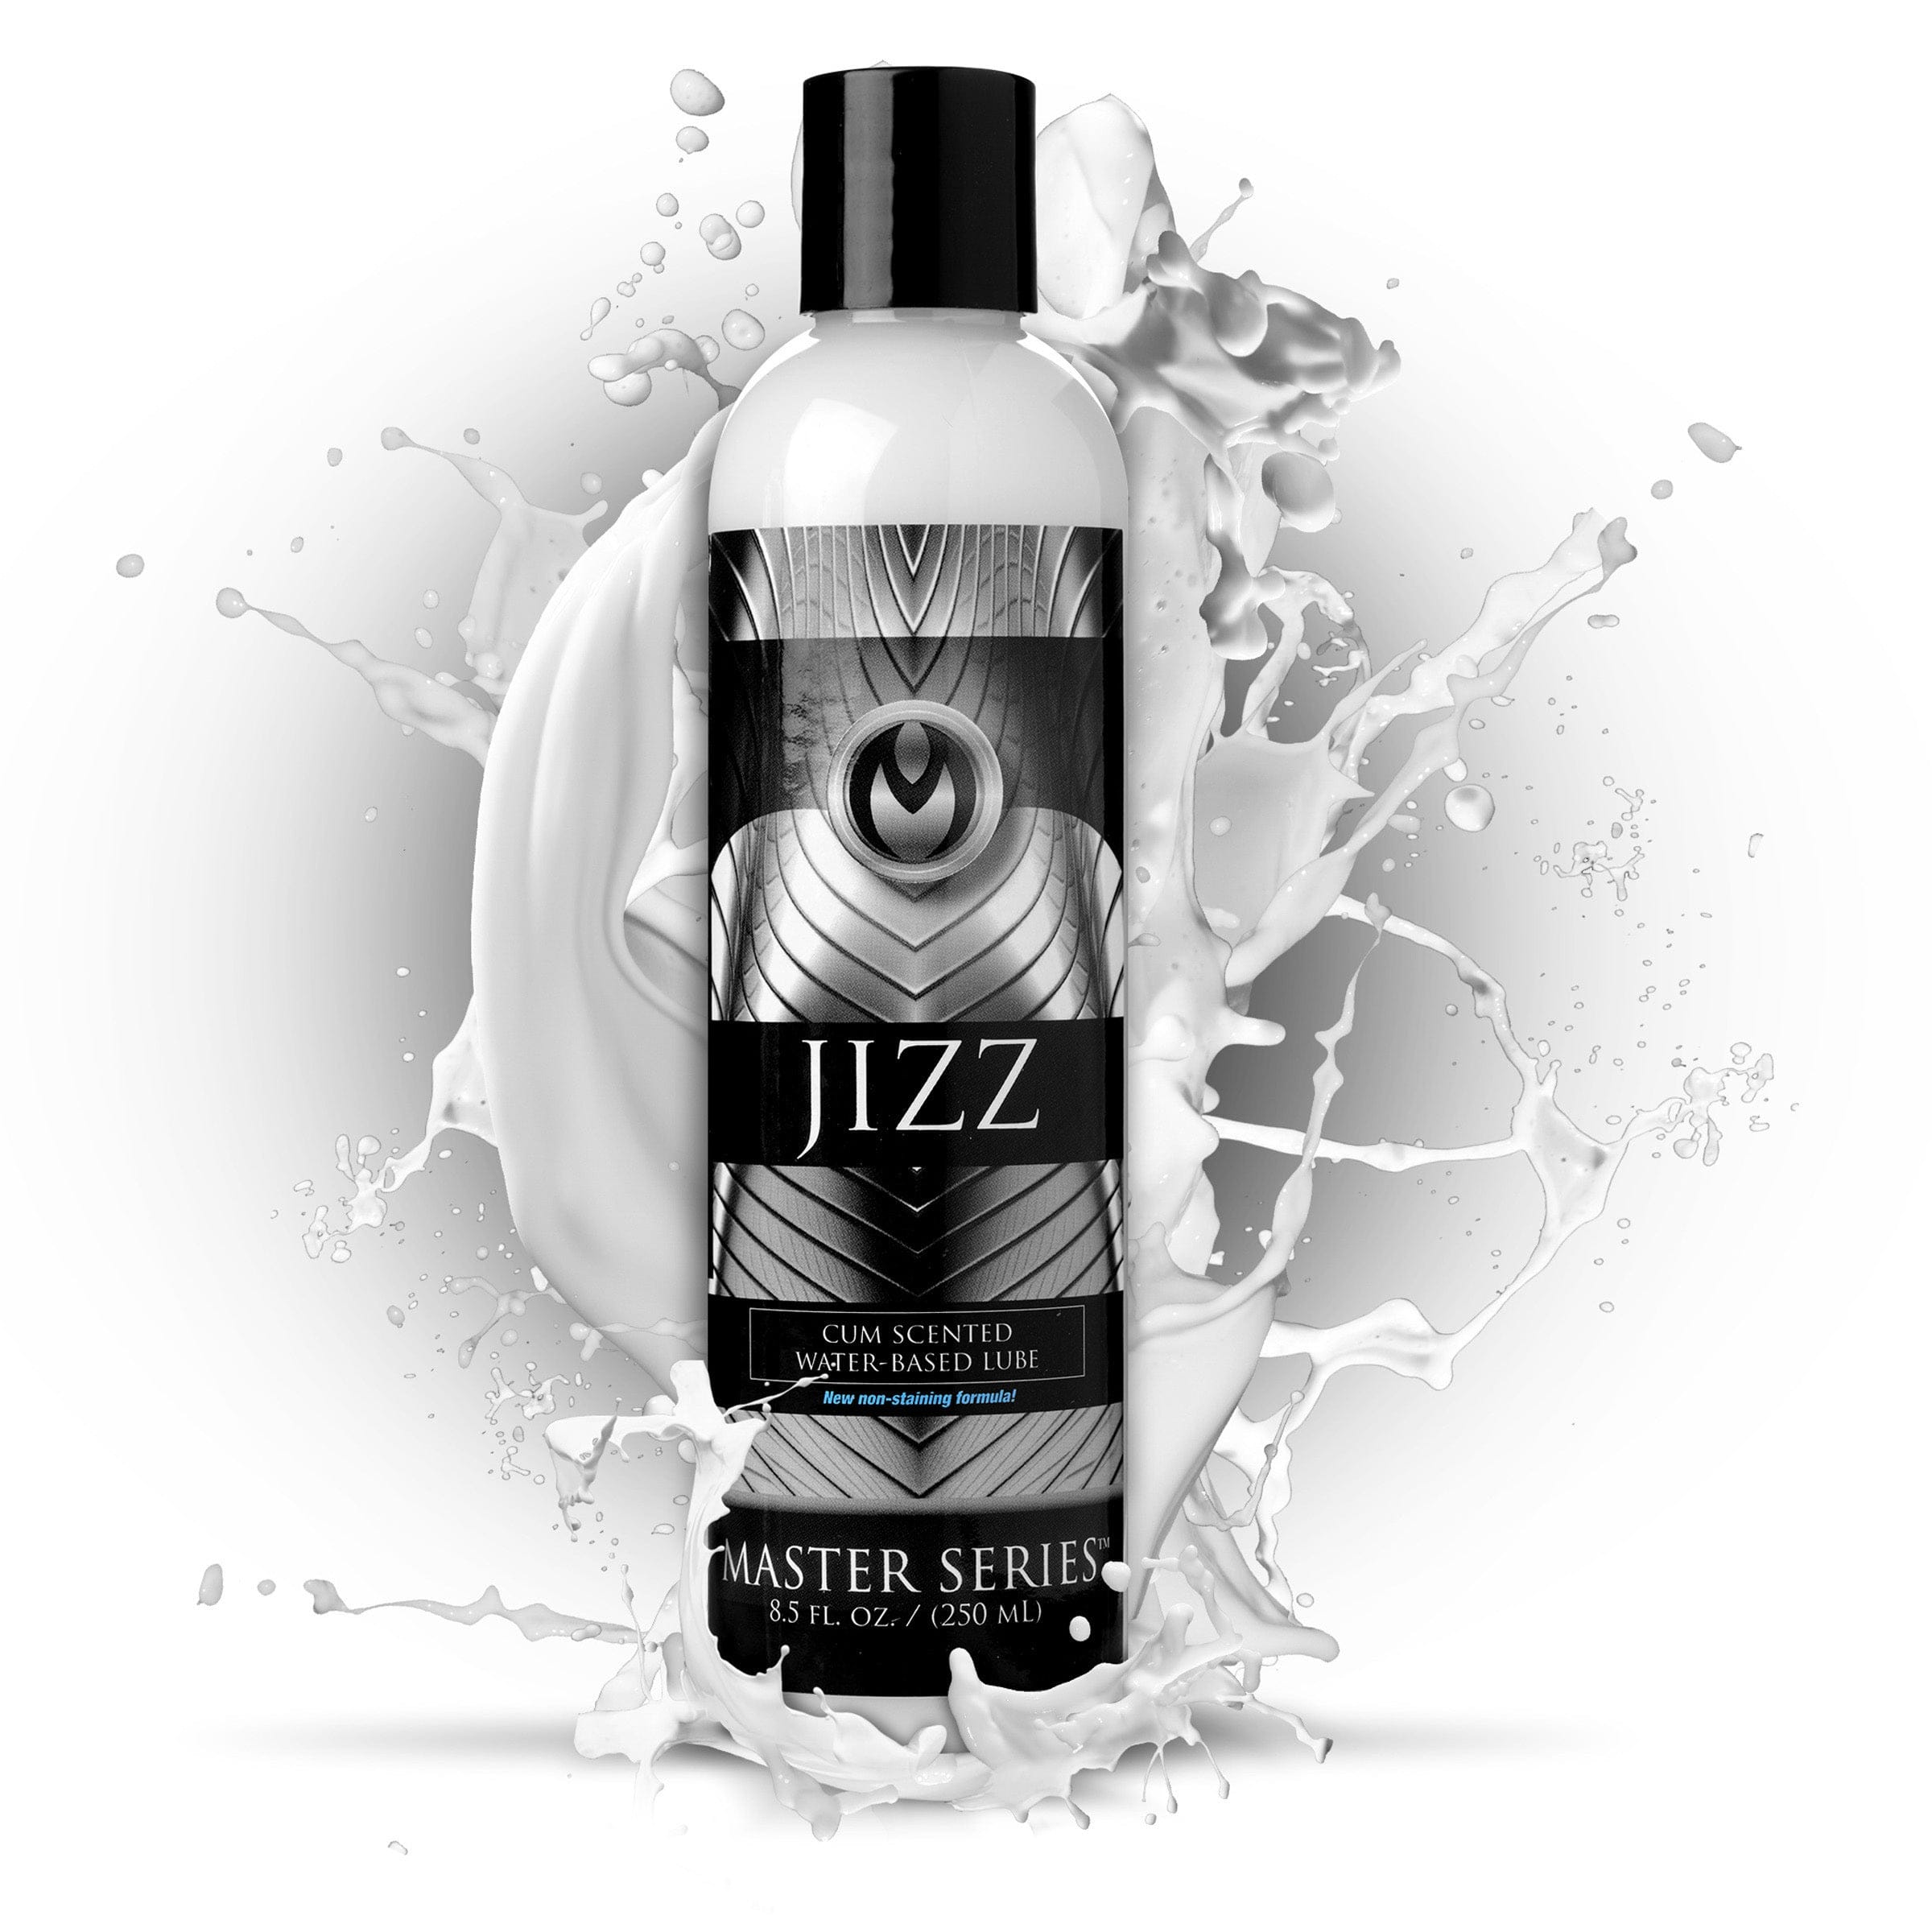 Master Series Water Based Lubricant 8.5 oz. Master Series 'Jizz' Water Based Cum Scented Lube at the Haus of Shag